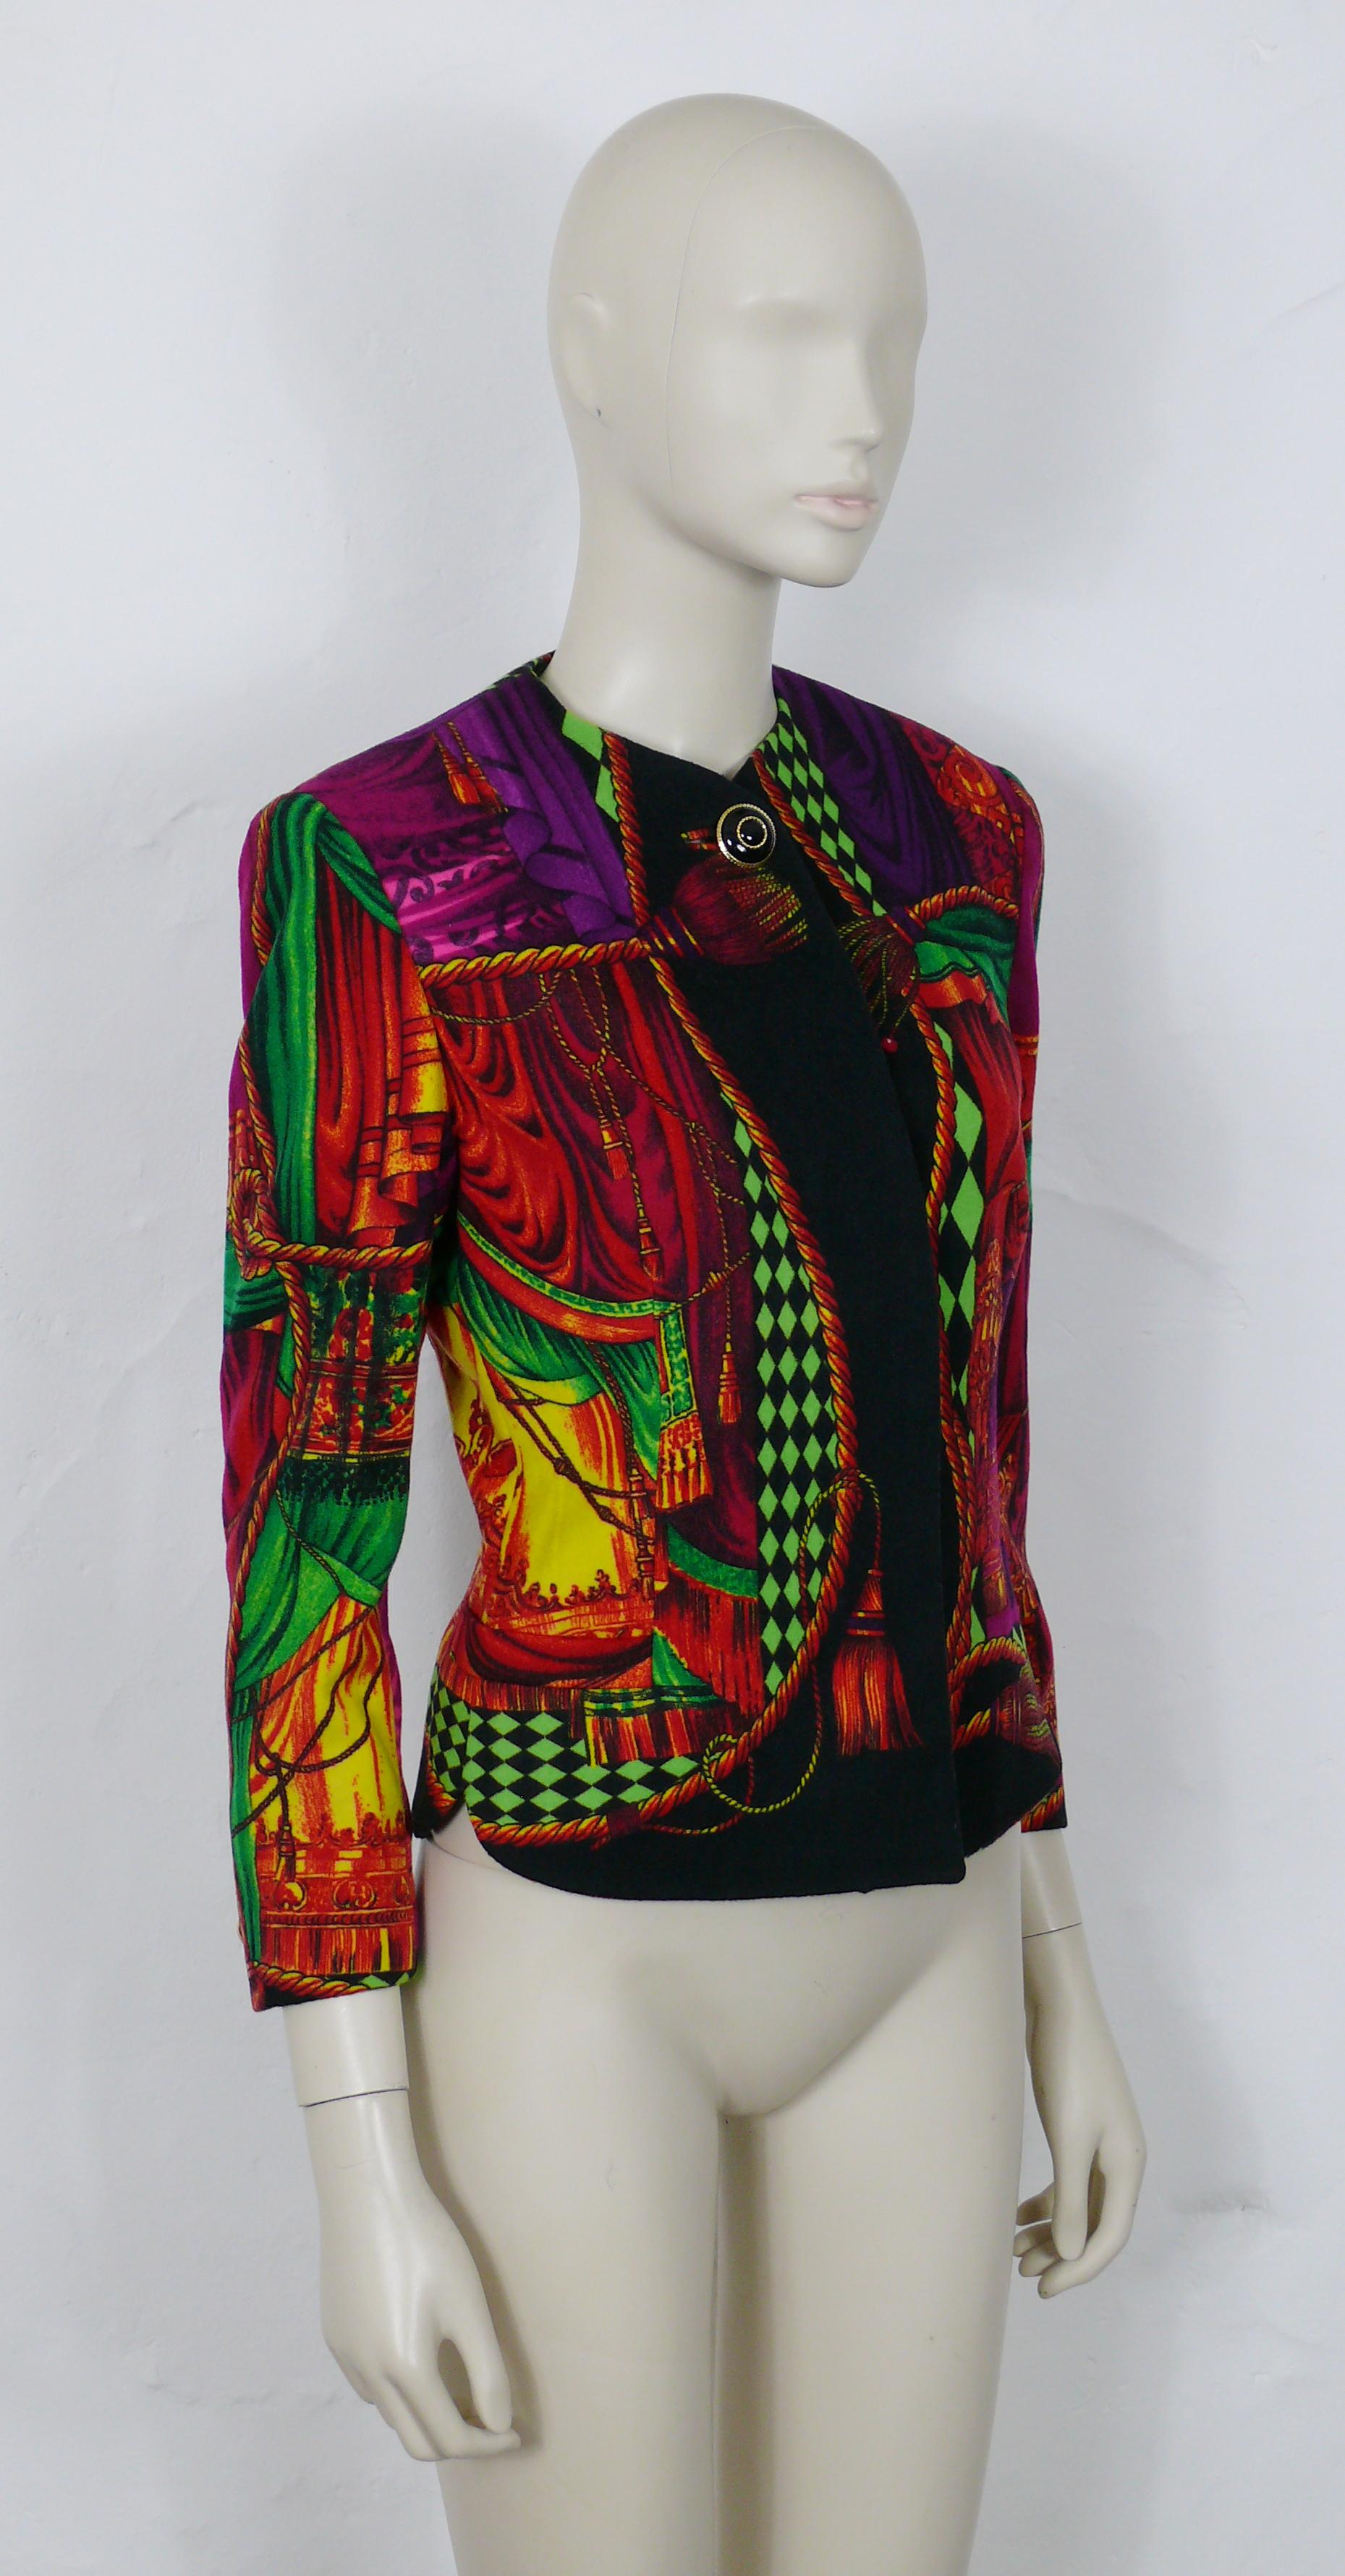 GIANNI VERSACE COUTURE vintage iconic theater drape print wool jacket.

From the Fall/Winter 1991/92 Collection.
I Sipari / Theater Drapes print from Theater series.

This jacket features :
- Opulent print featuring theater drape, tassels and